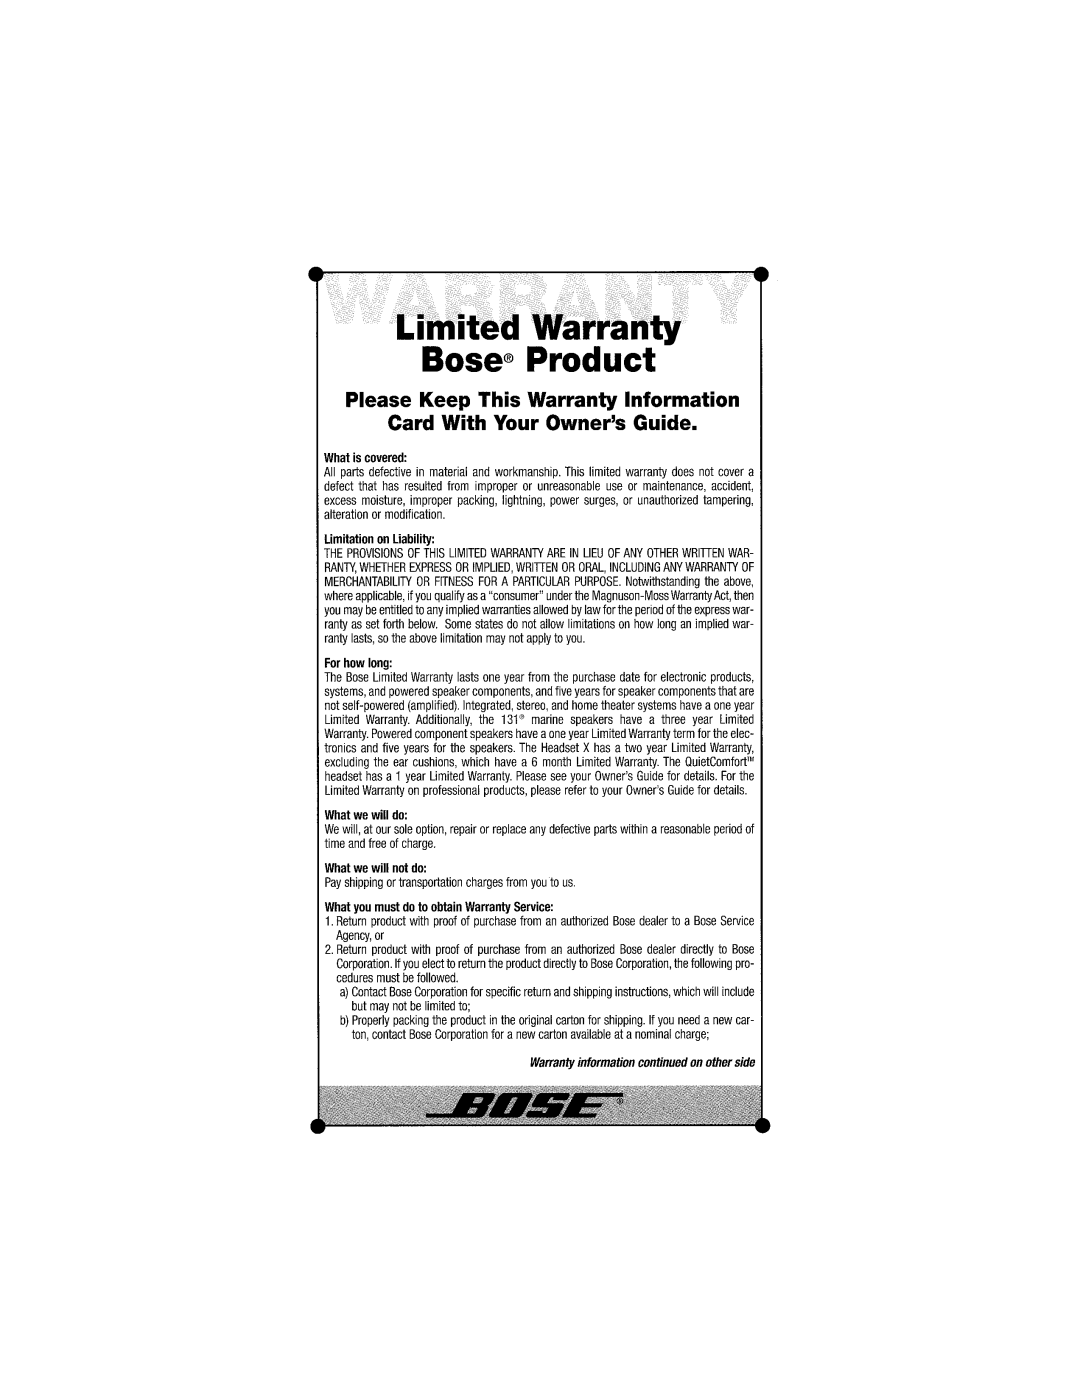 Bose SA-3 Bose Product, Please Keep This Warranty Information, Card With Your OwnersGuide, What is covered, For how long 